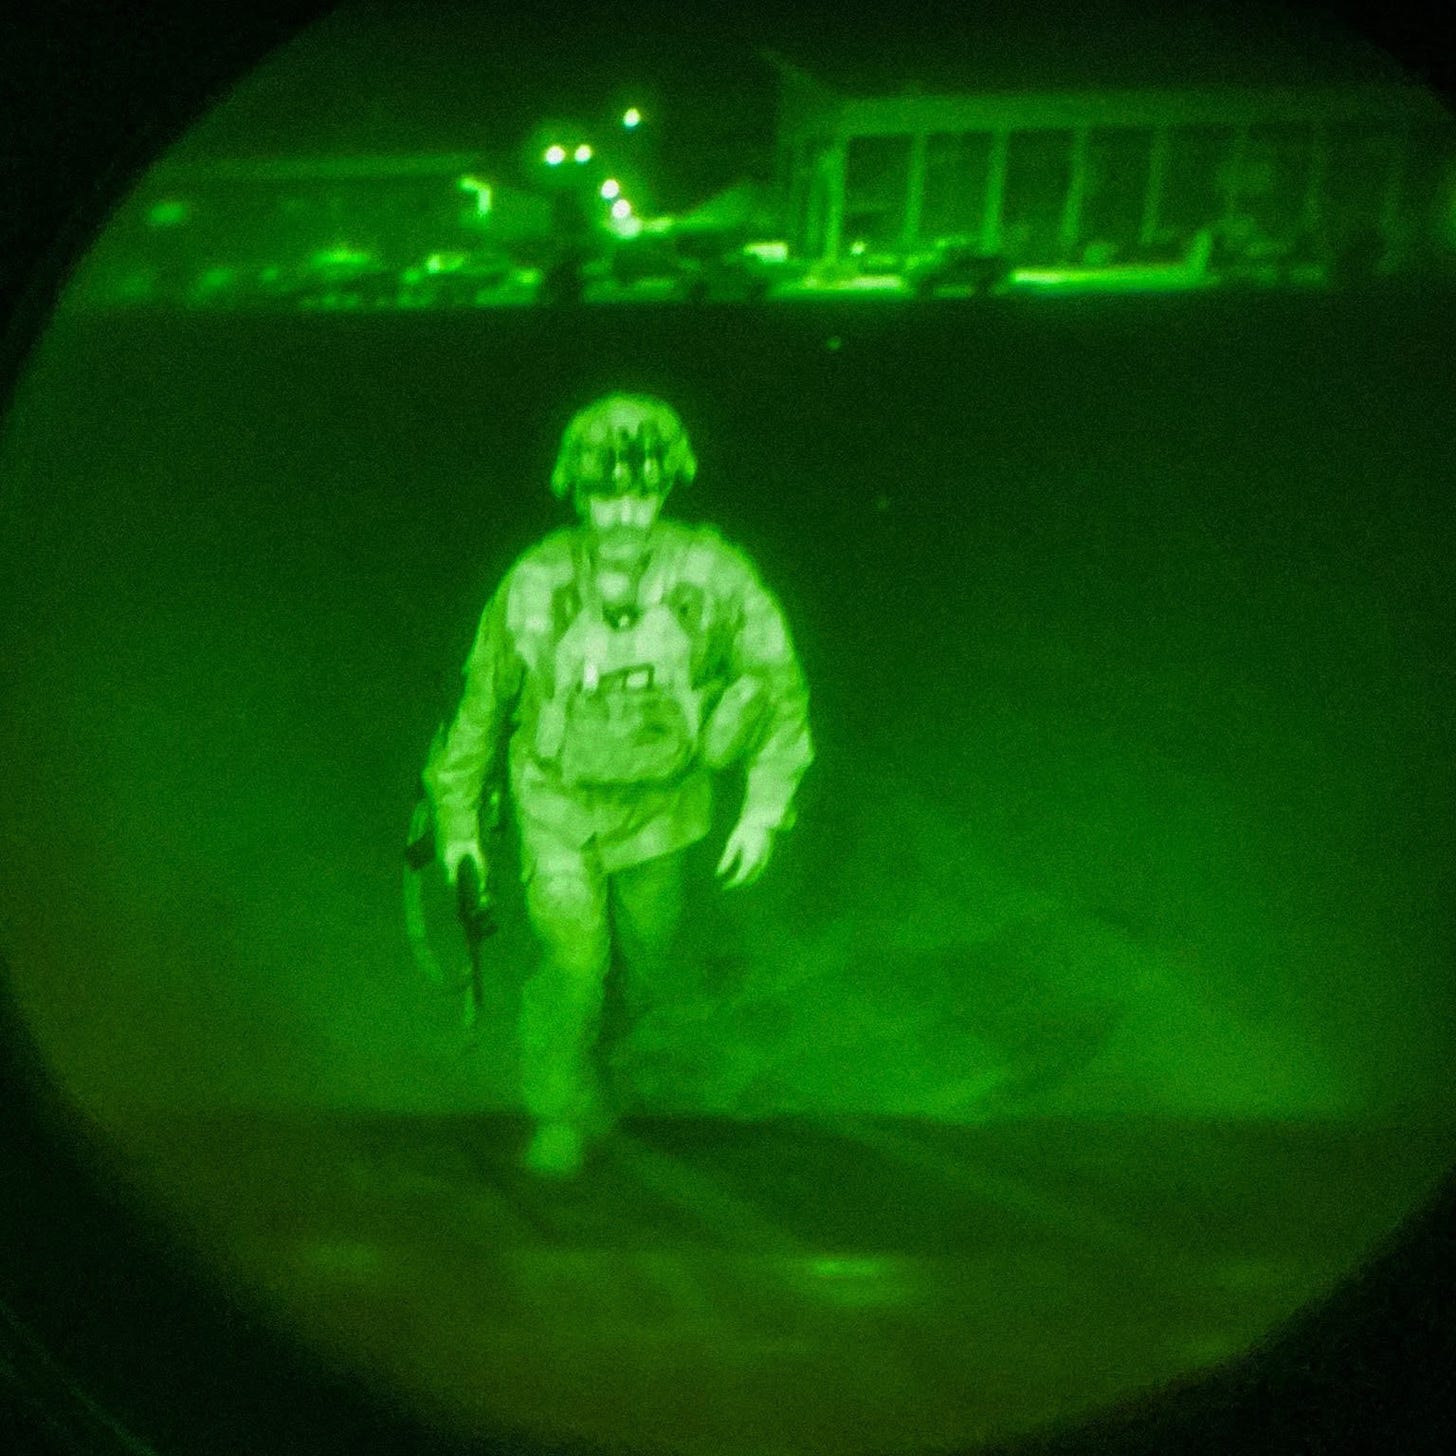 A man in full combat uniform boards a plane at night.